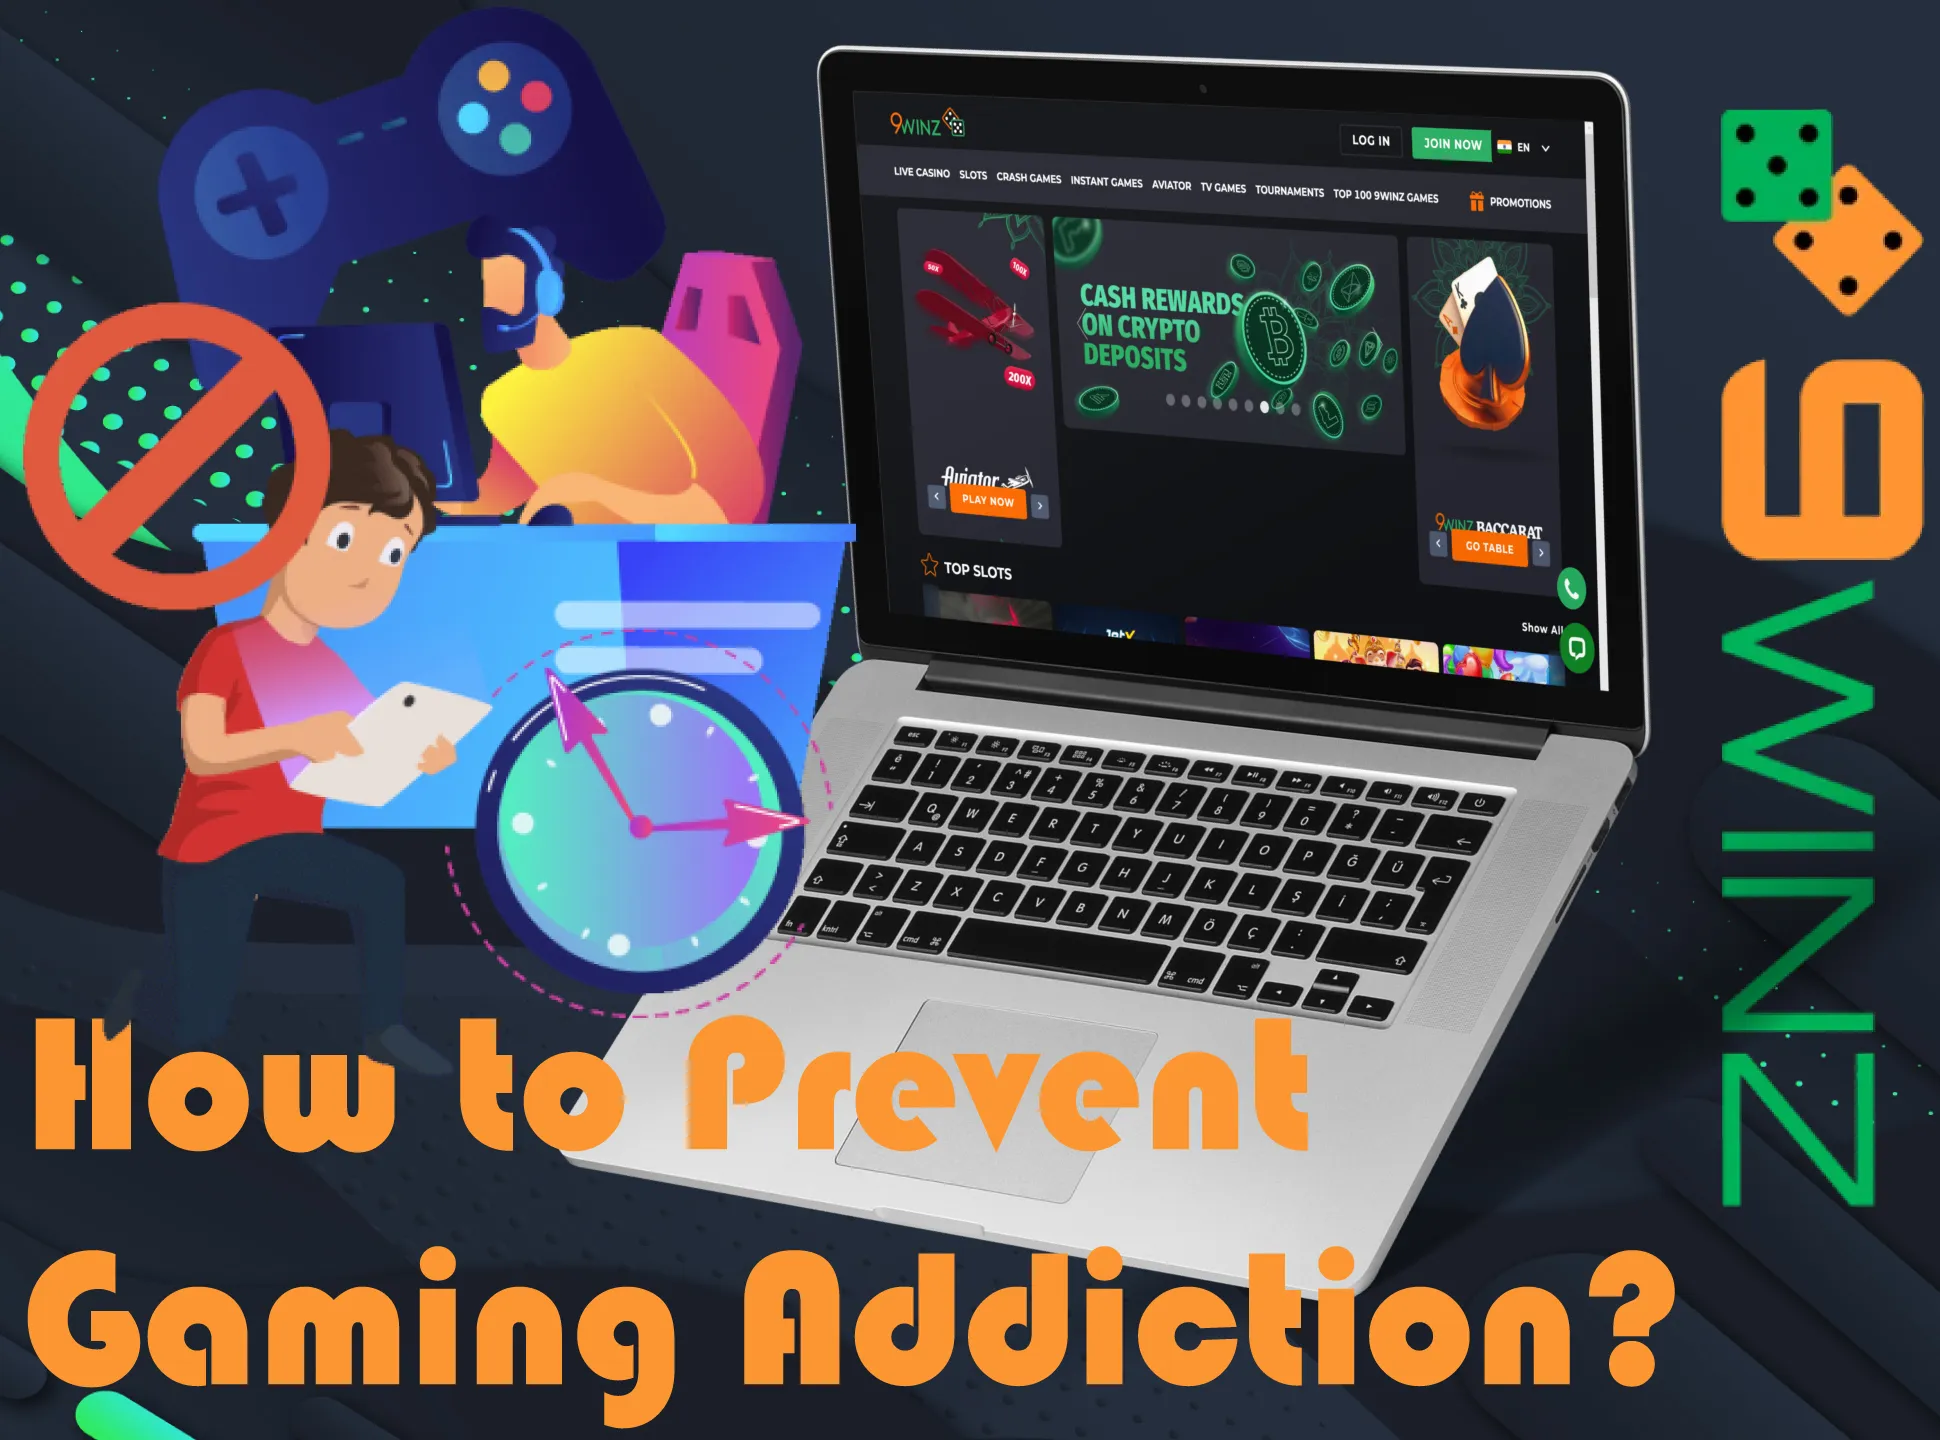 Prevent gaming addiction with 9winz simple tips.